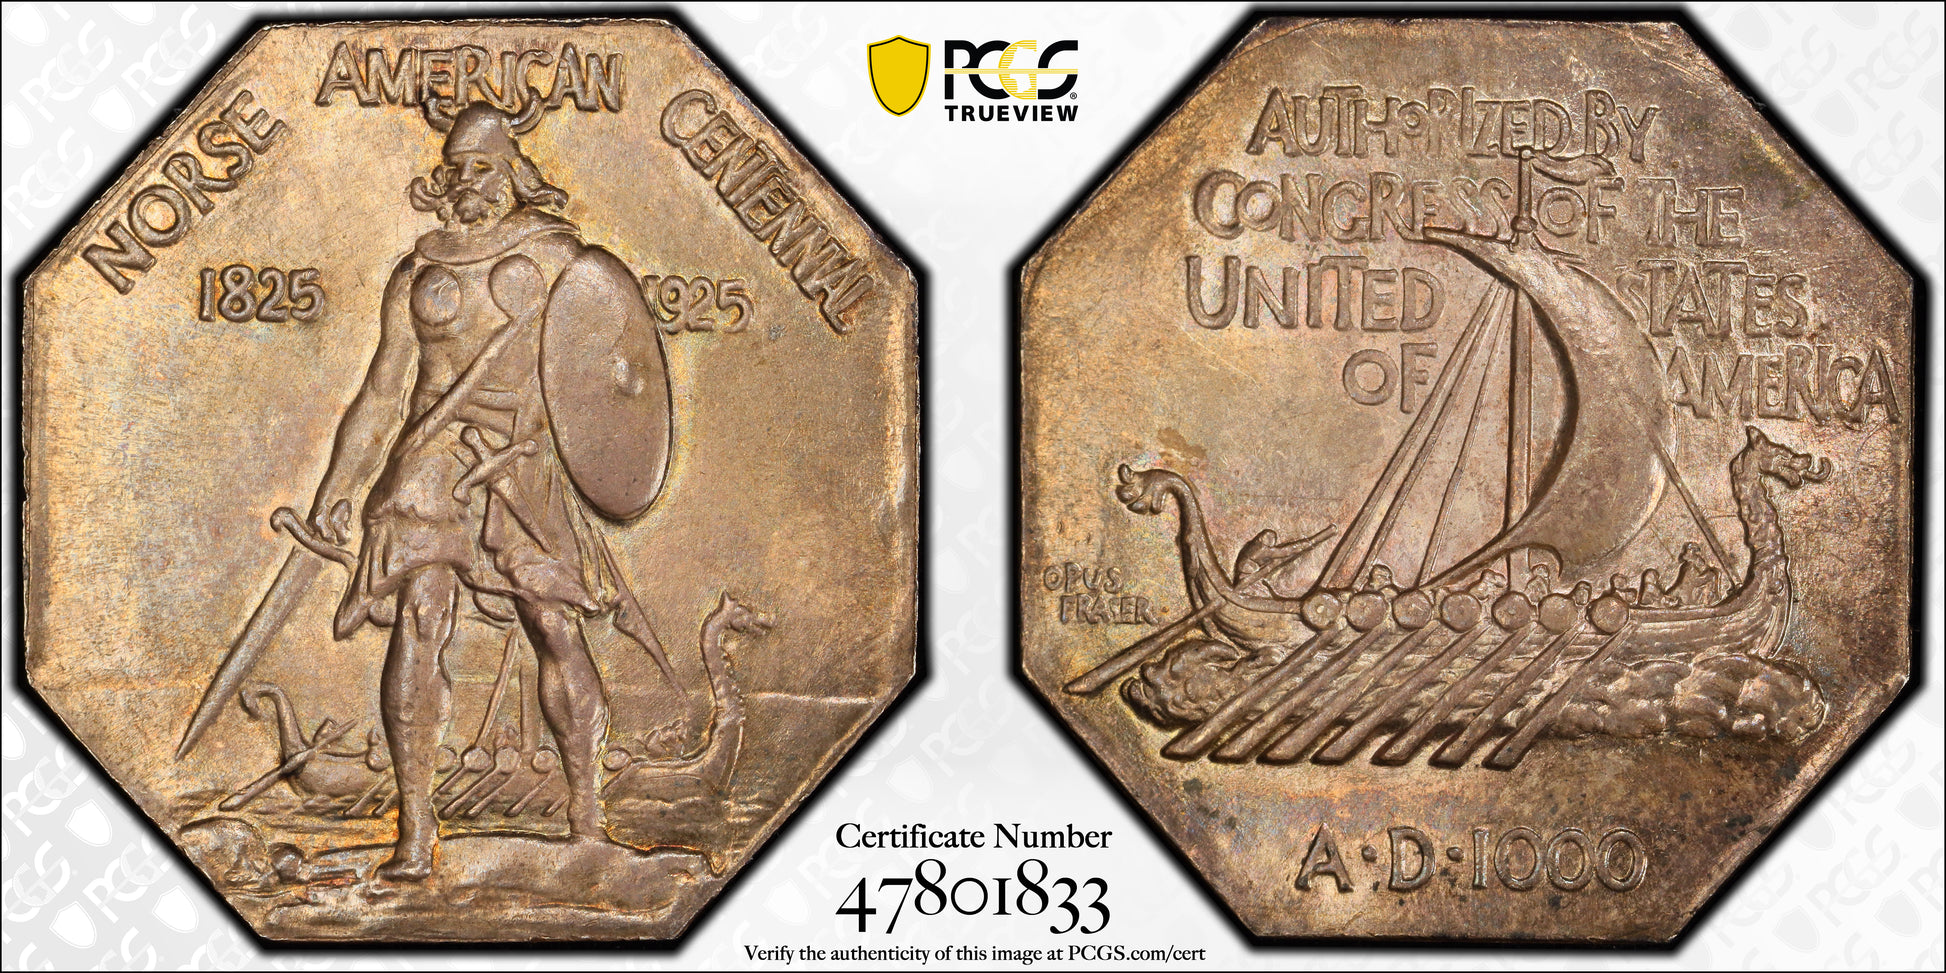 1925 Norse American Centennial Silver Medal PCGS MS66 CAC Thin Planchet Trueview